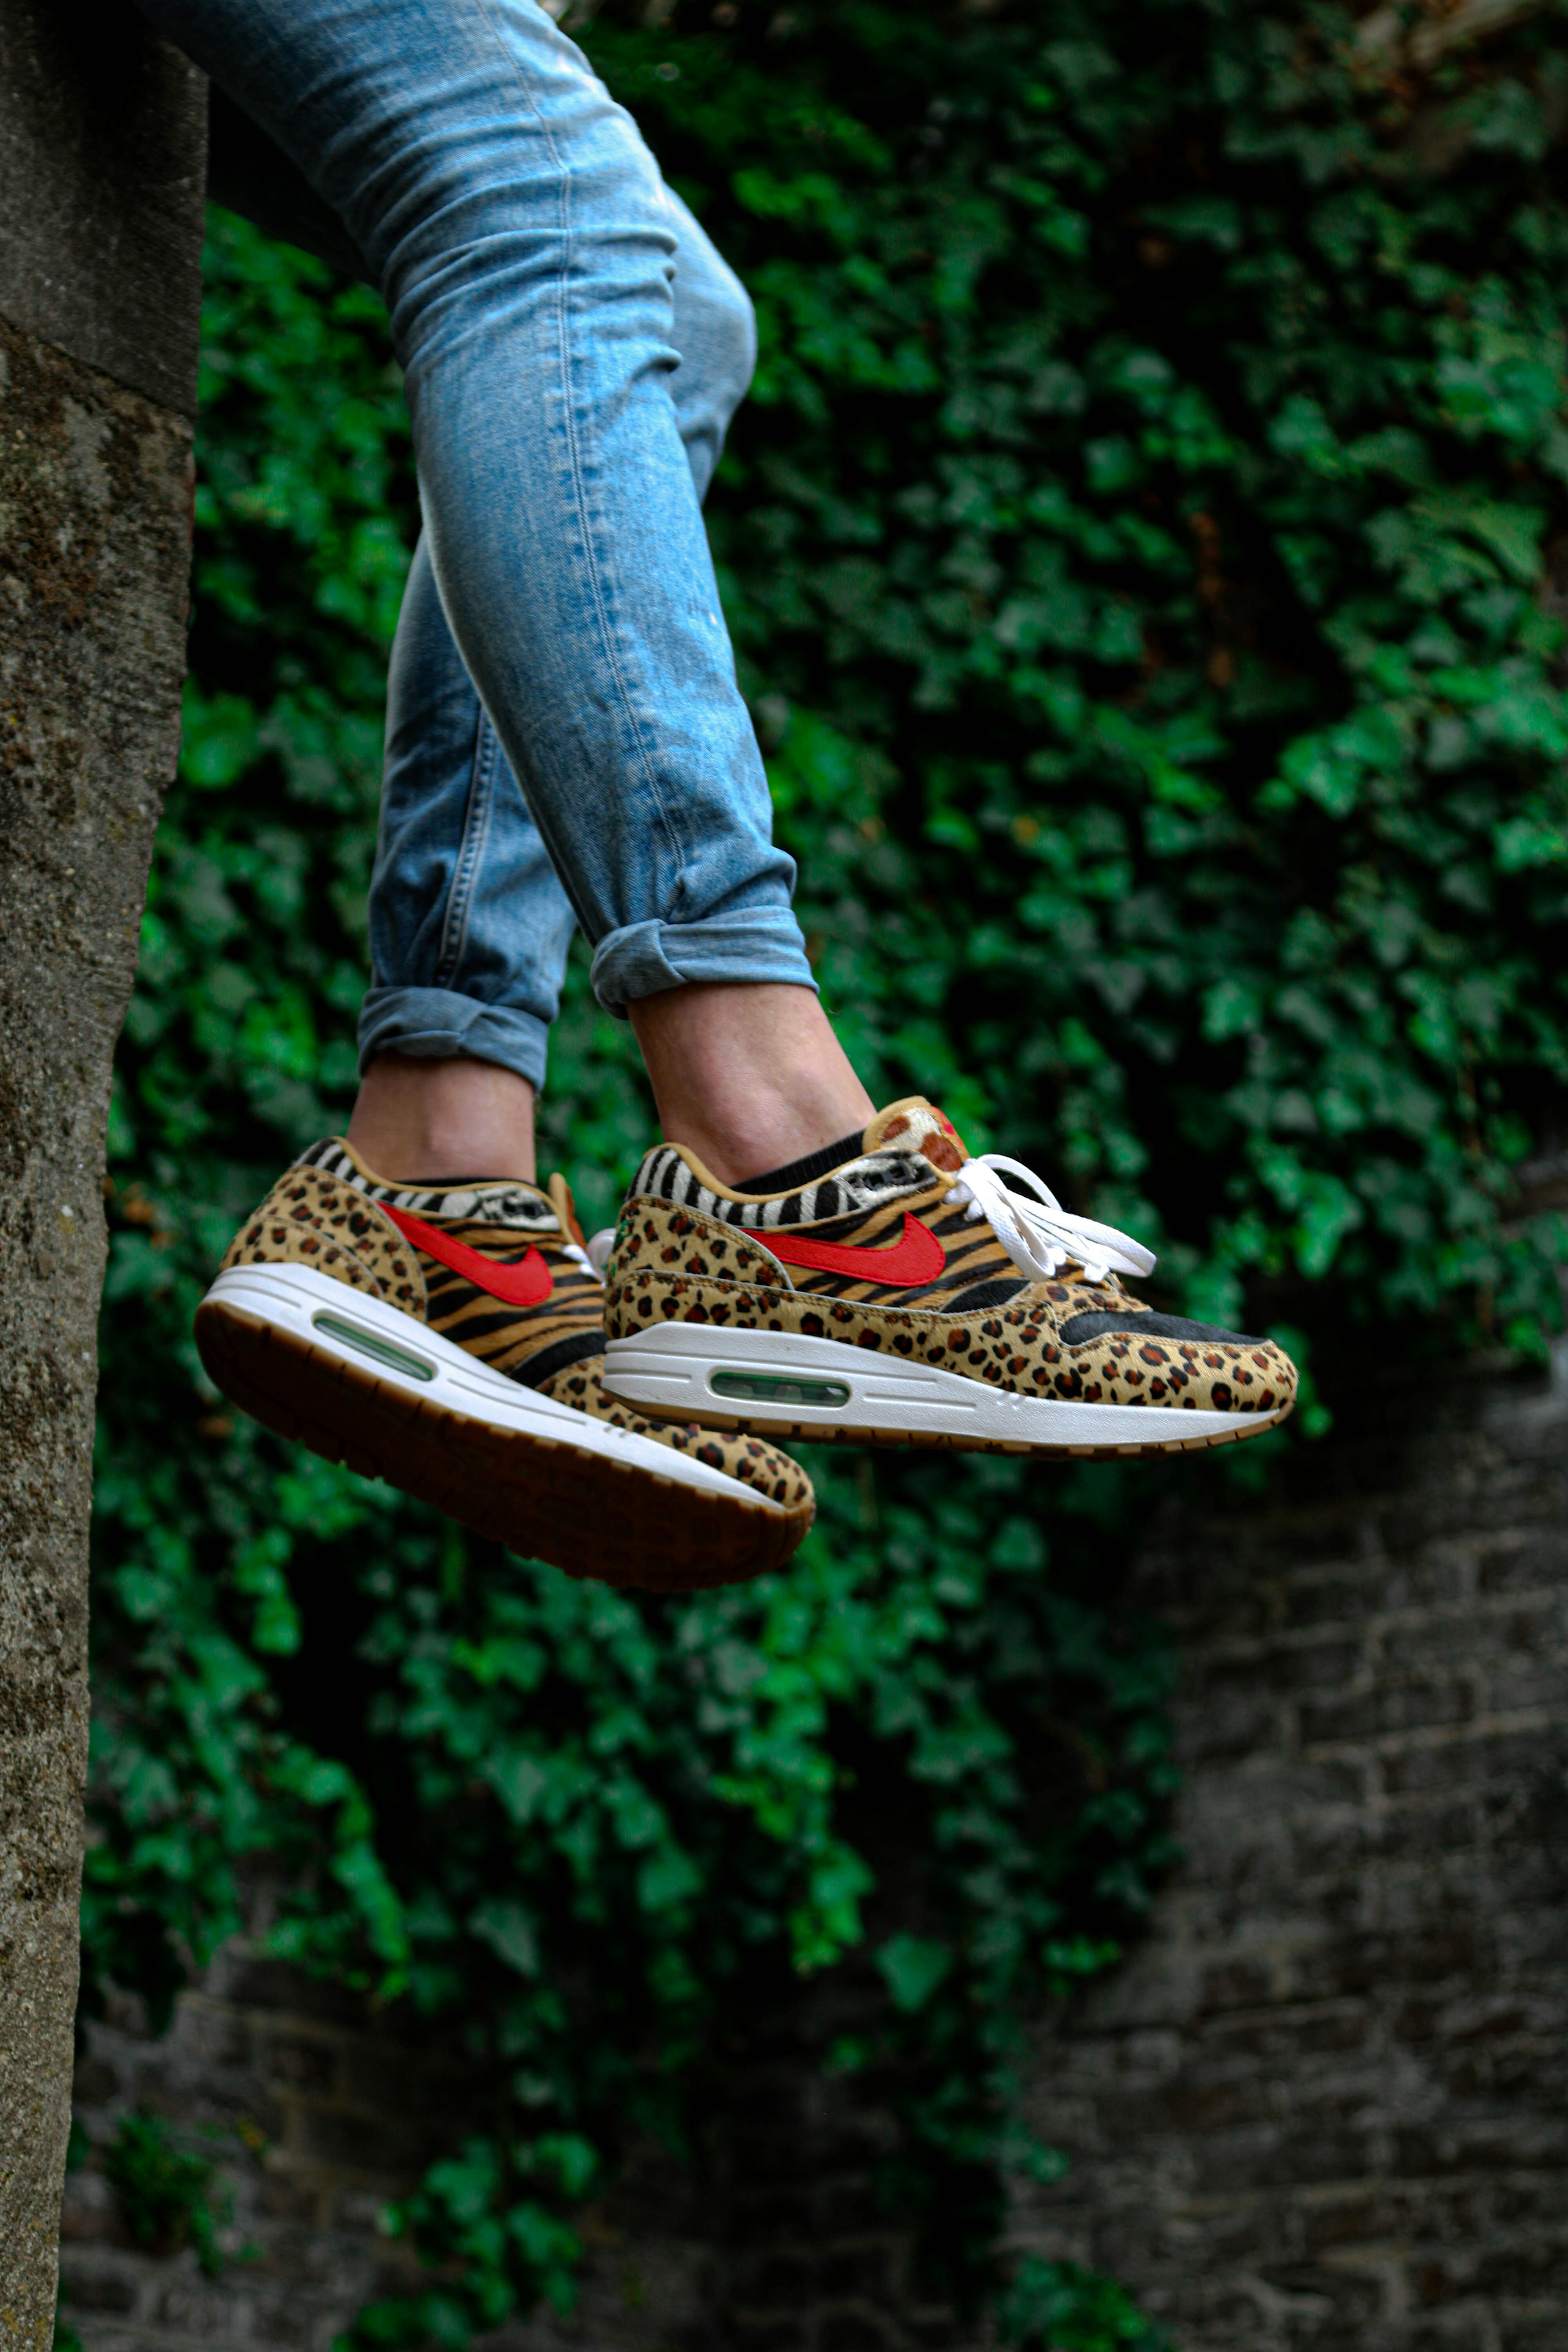 Sneaker photography in the jungle